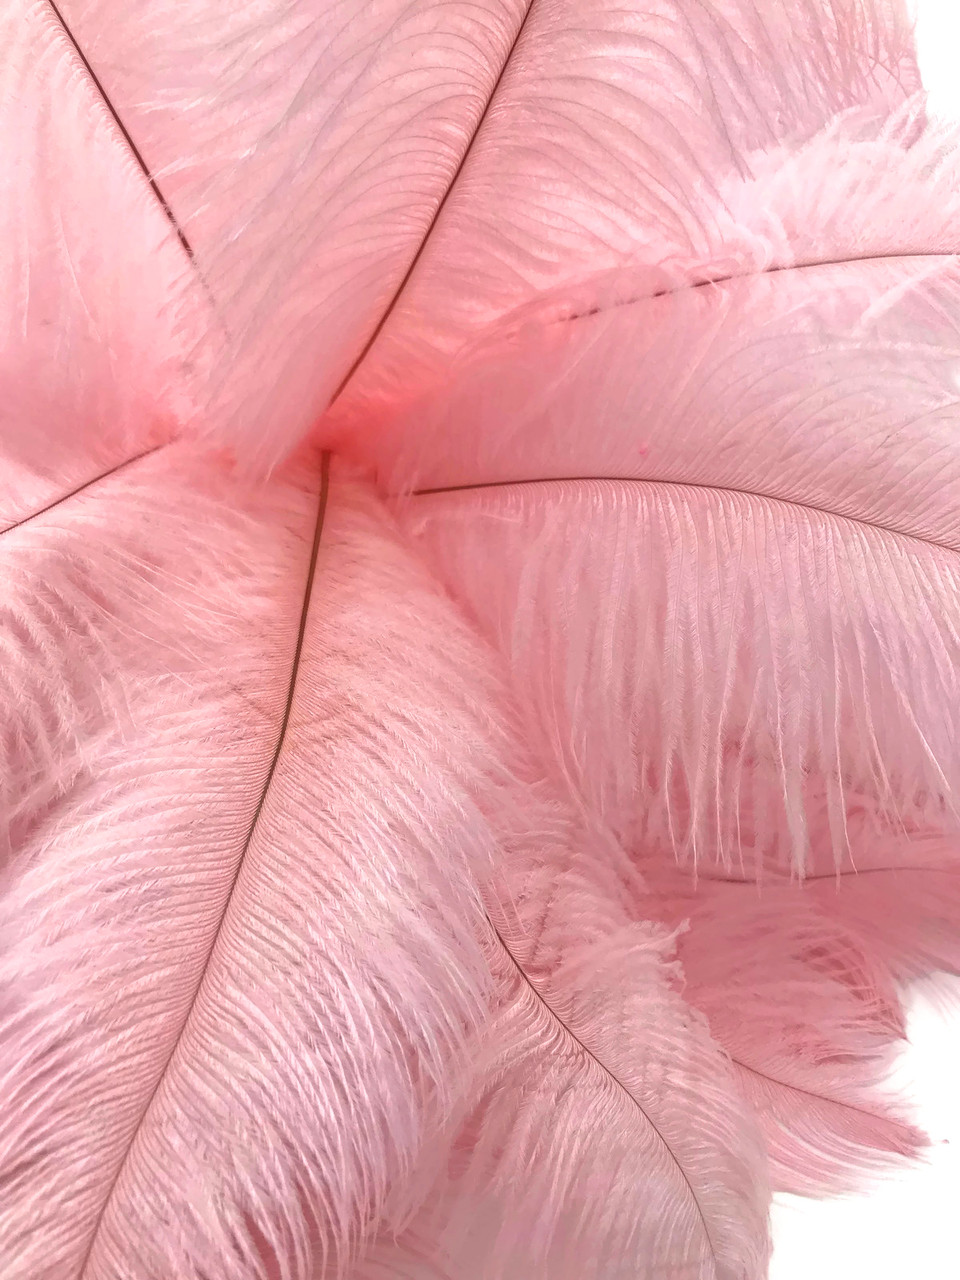 BIG Ostrich Feathers LIGHT PINK 21-24 Length 9-10 wide Price is